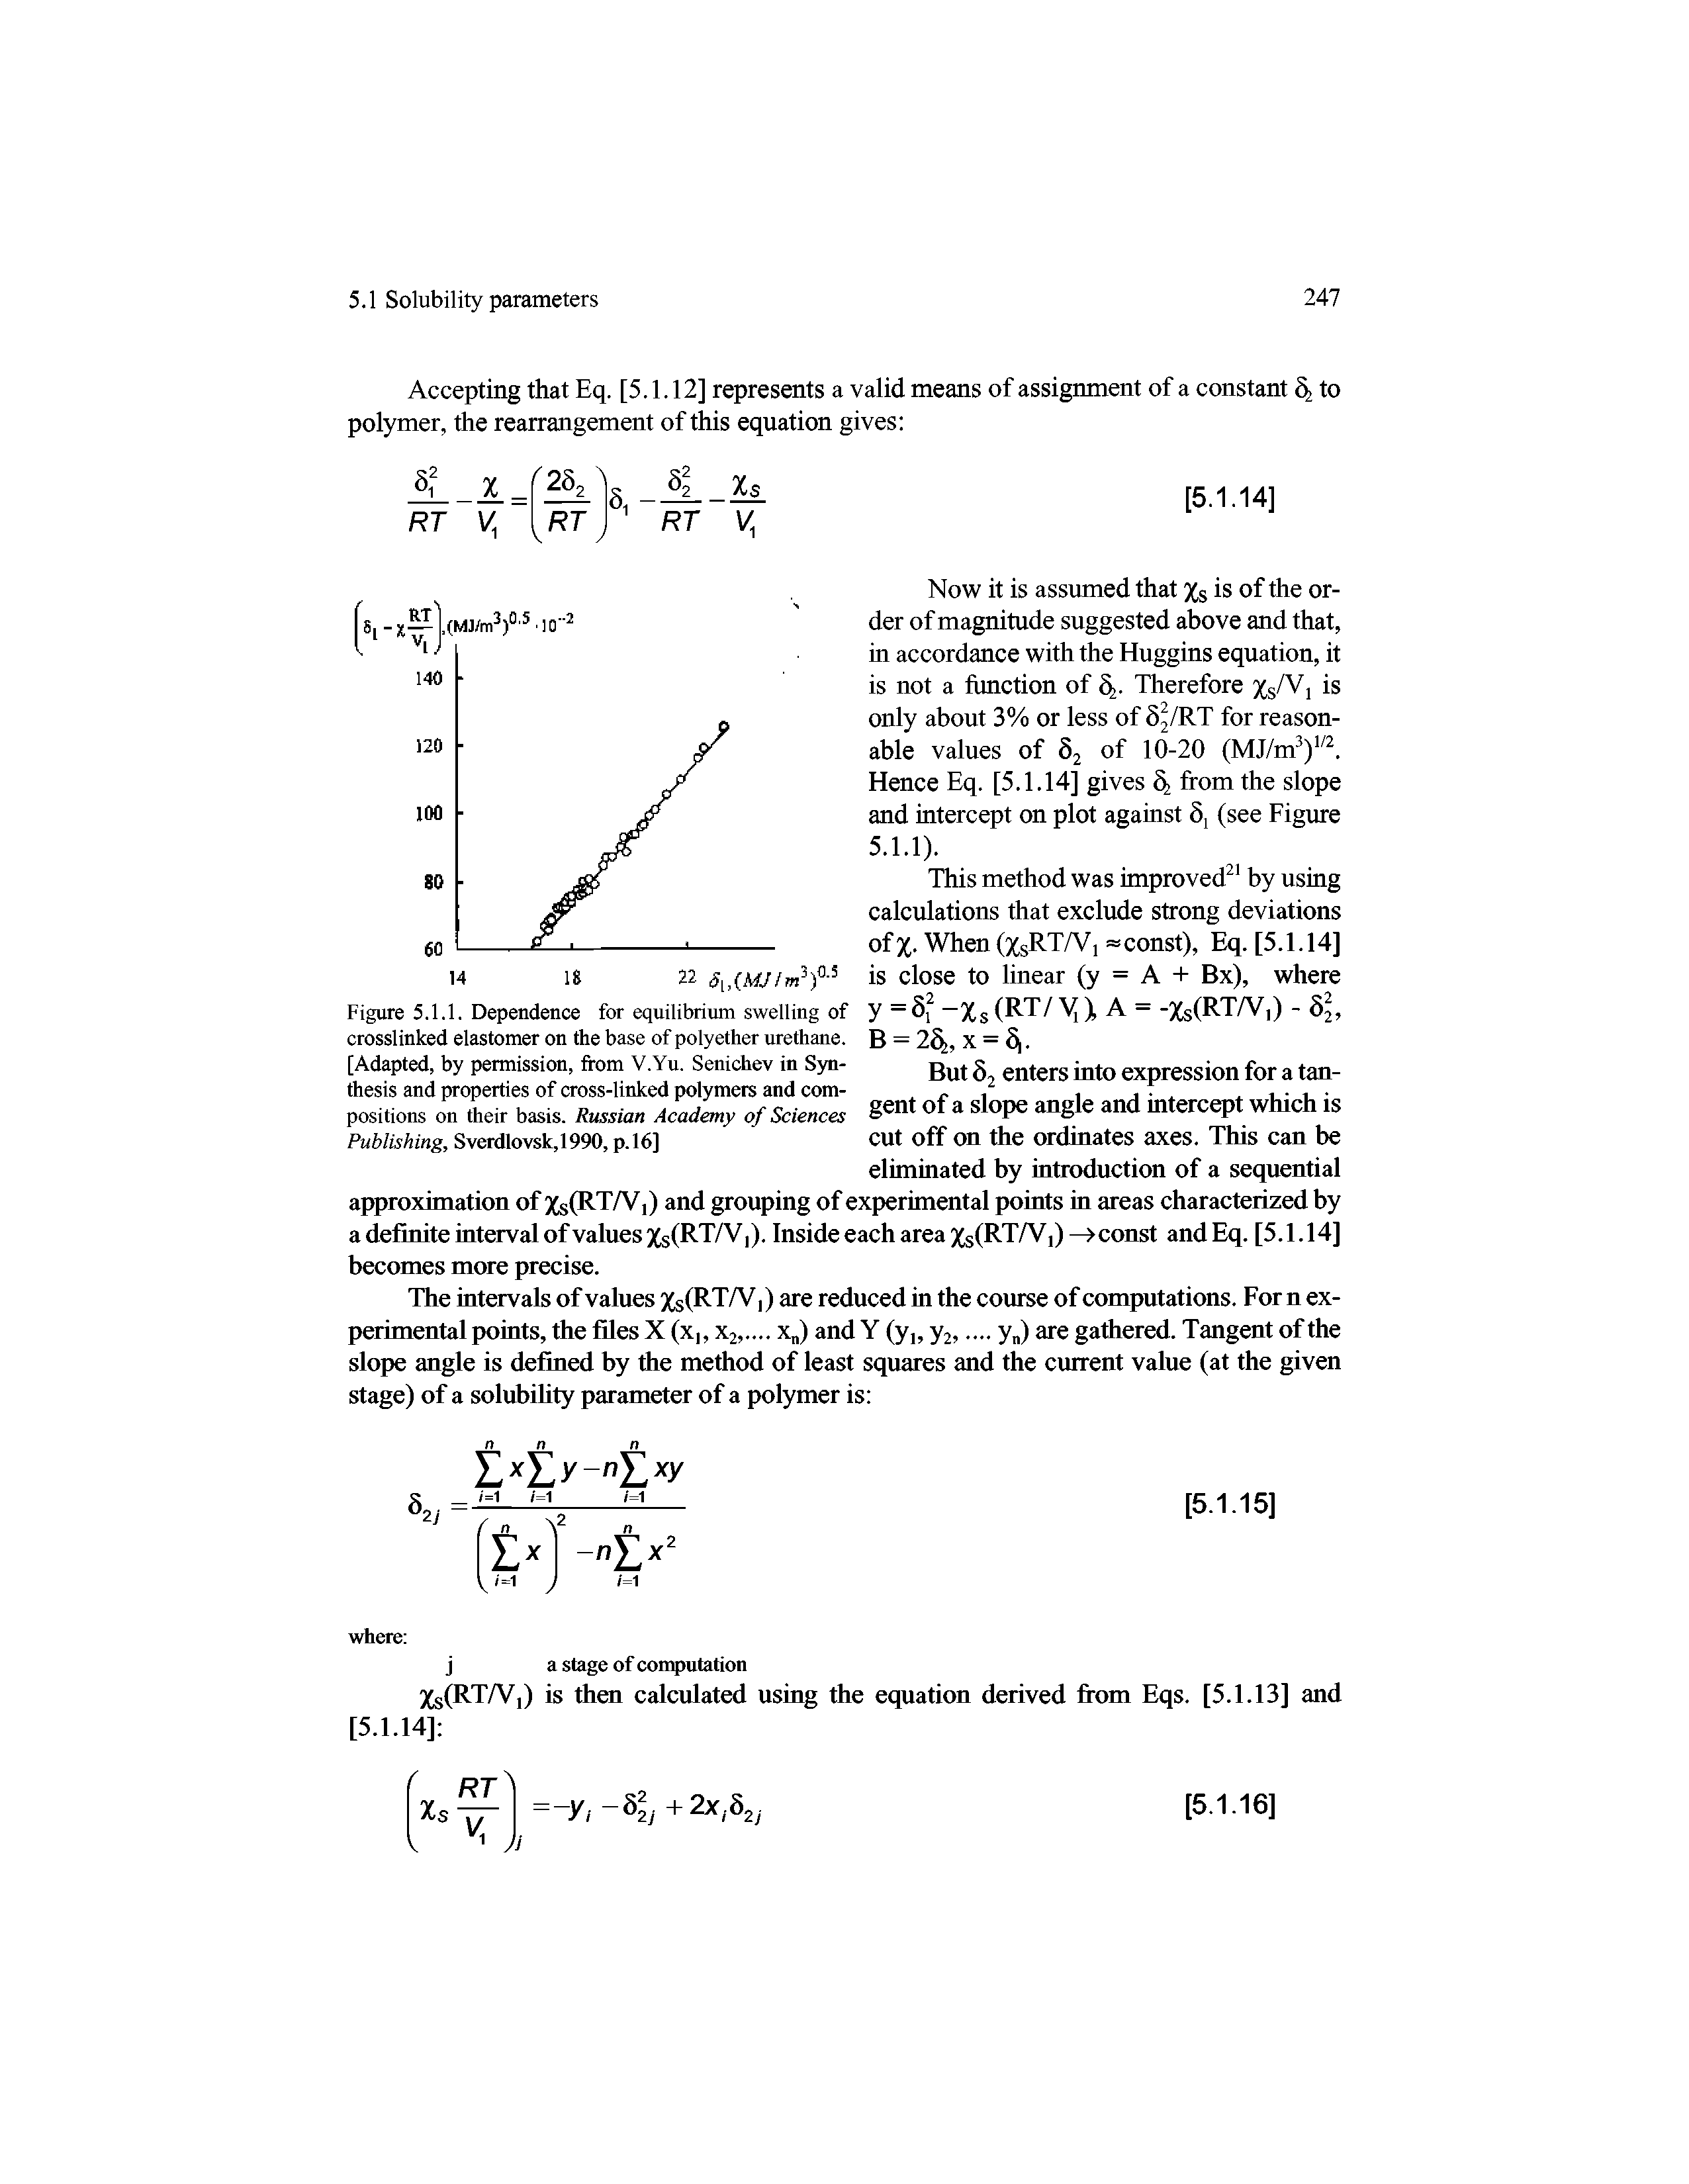 Figure 5.1.1. Dependence for equilibrium swelling of crosslinked elastomer on the base of poly ether urethane. [Adapted, by permission, from V.Yu. Senichev in Synthesis and properties of cross-linked polymers and compositions on their basis. Russian Academy of Sciences Publishing, Sverdlovsk,1990, p.l6]...